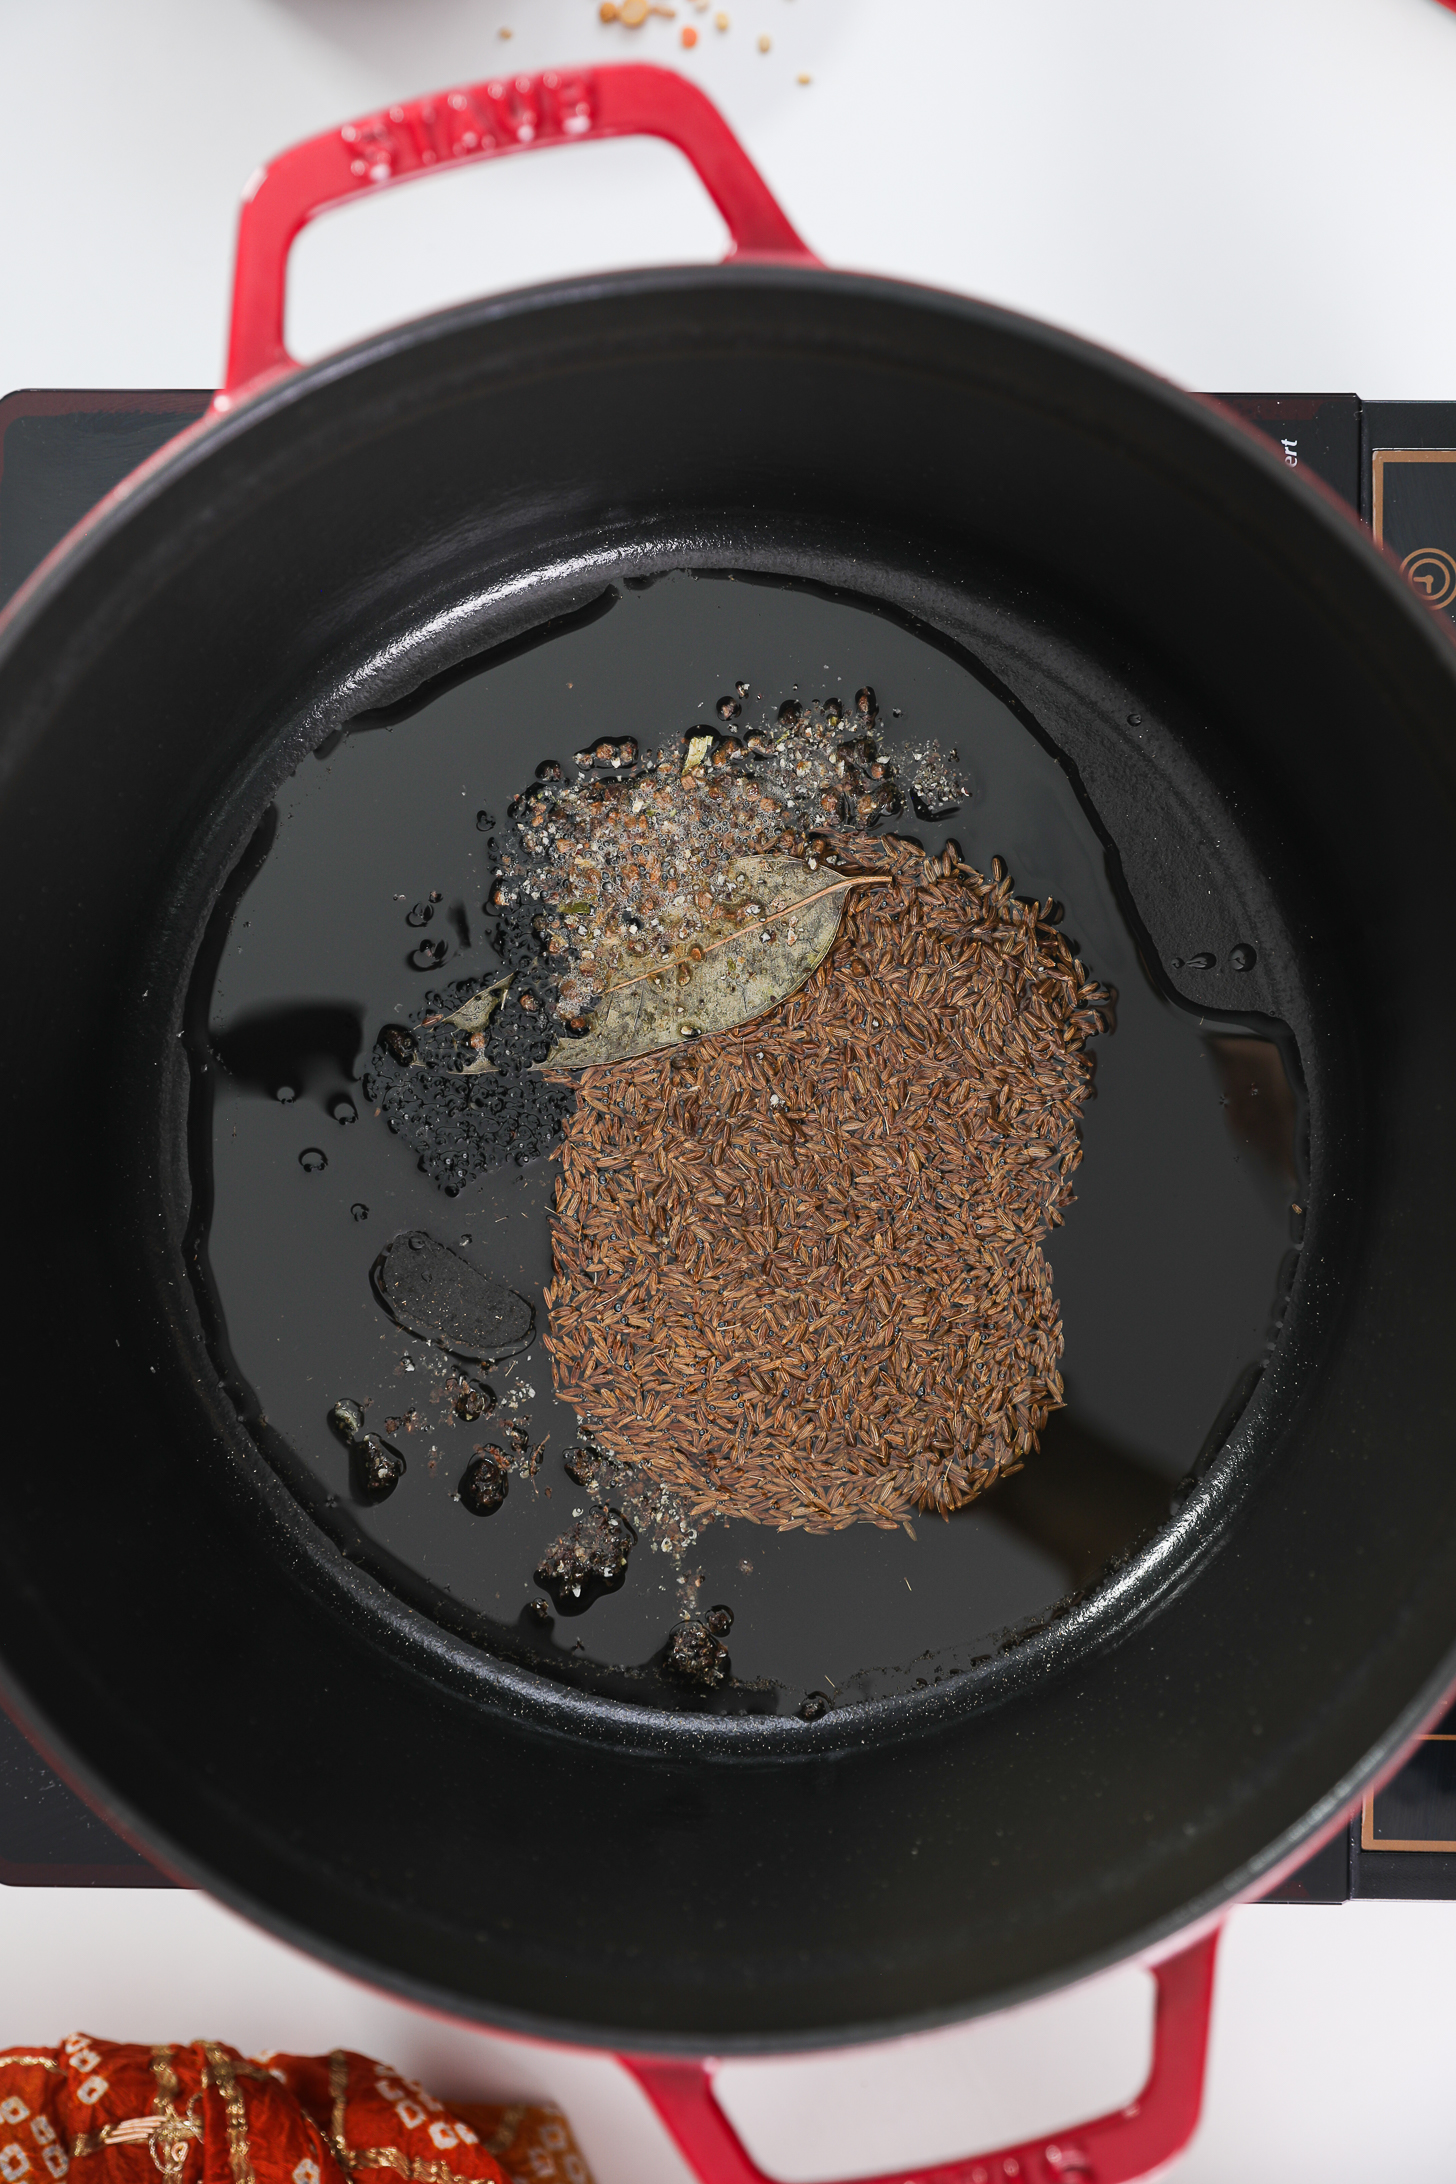 Cumin seeds, bay leaf, and other seeds tempering in oil in a cook pot.